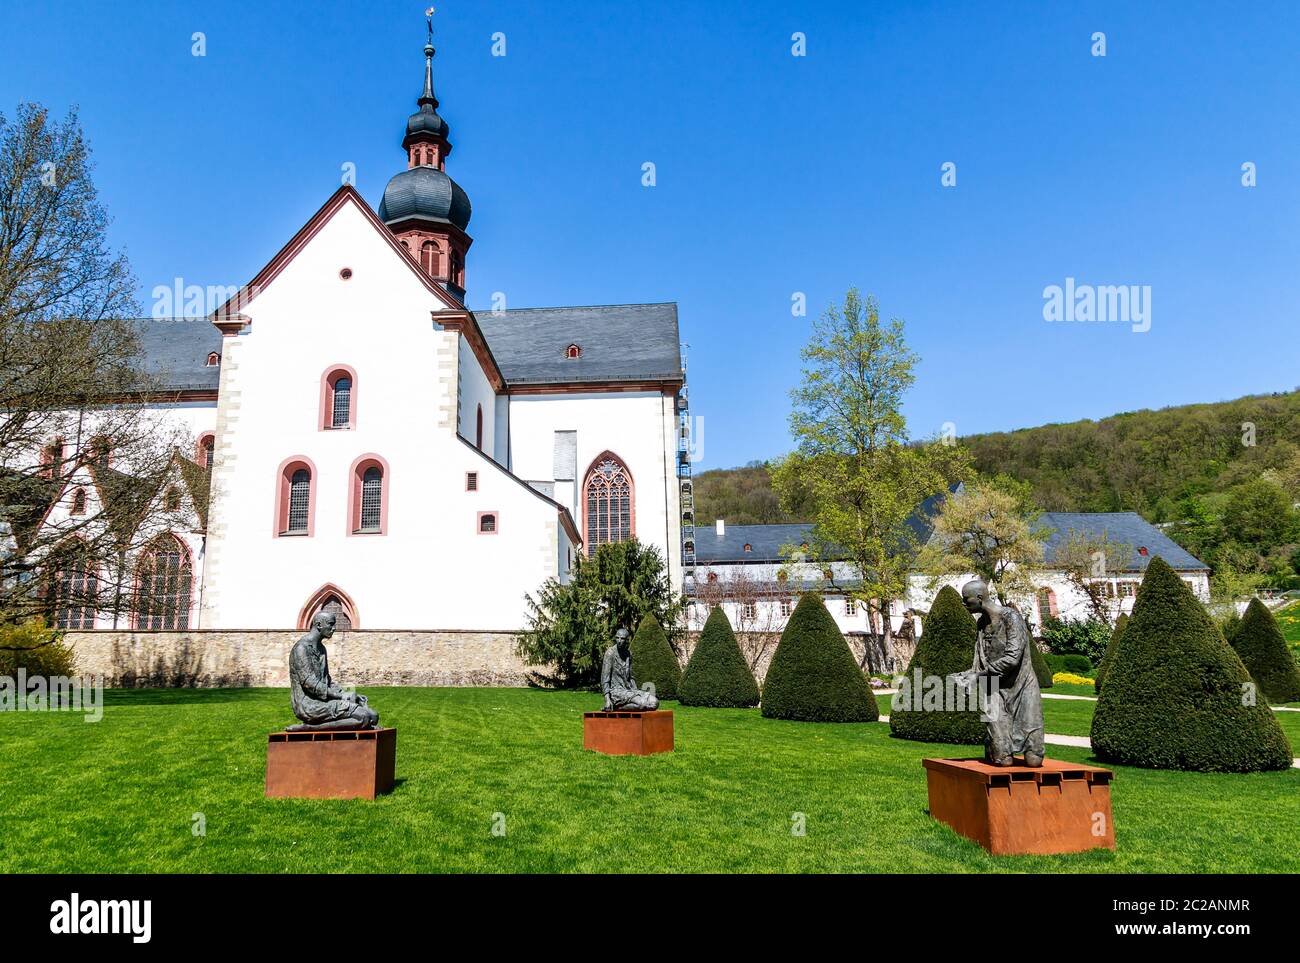 Historic Eberbach Abbey, Mystic heritage of the Cistercian monks in Rheingau, filming location for the movie The Name of the Rose, near Eltville am Rhein, Hesse, Germany Stock Photo